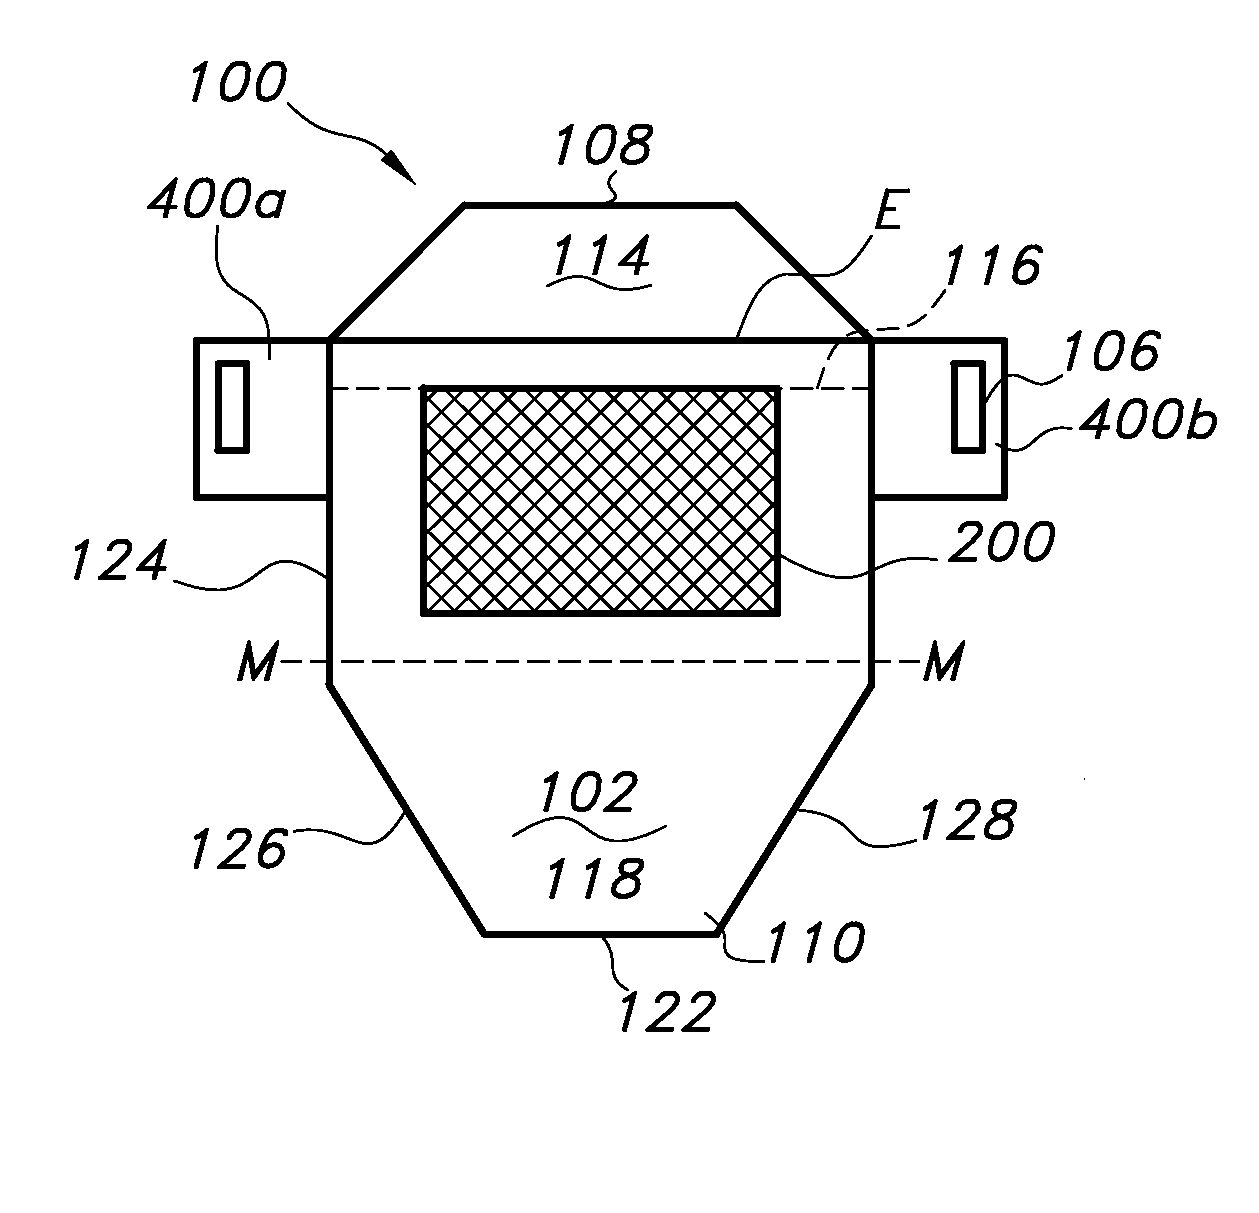 Multi-Panel Sterilization Assembly With Transport Adhesive